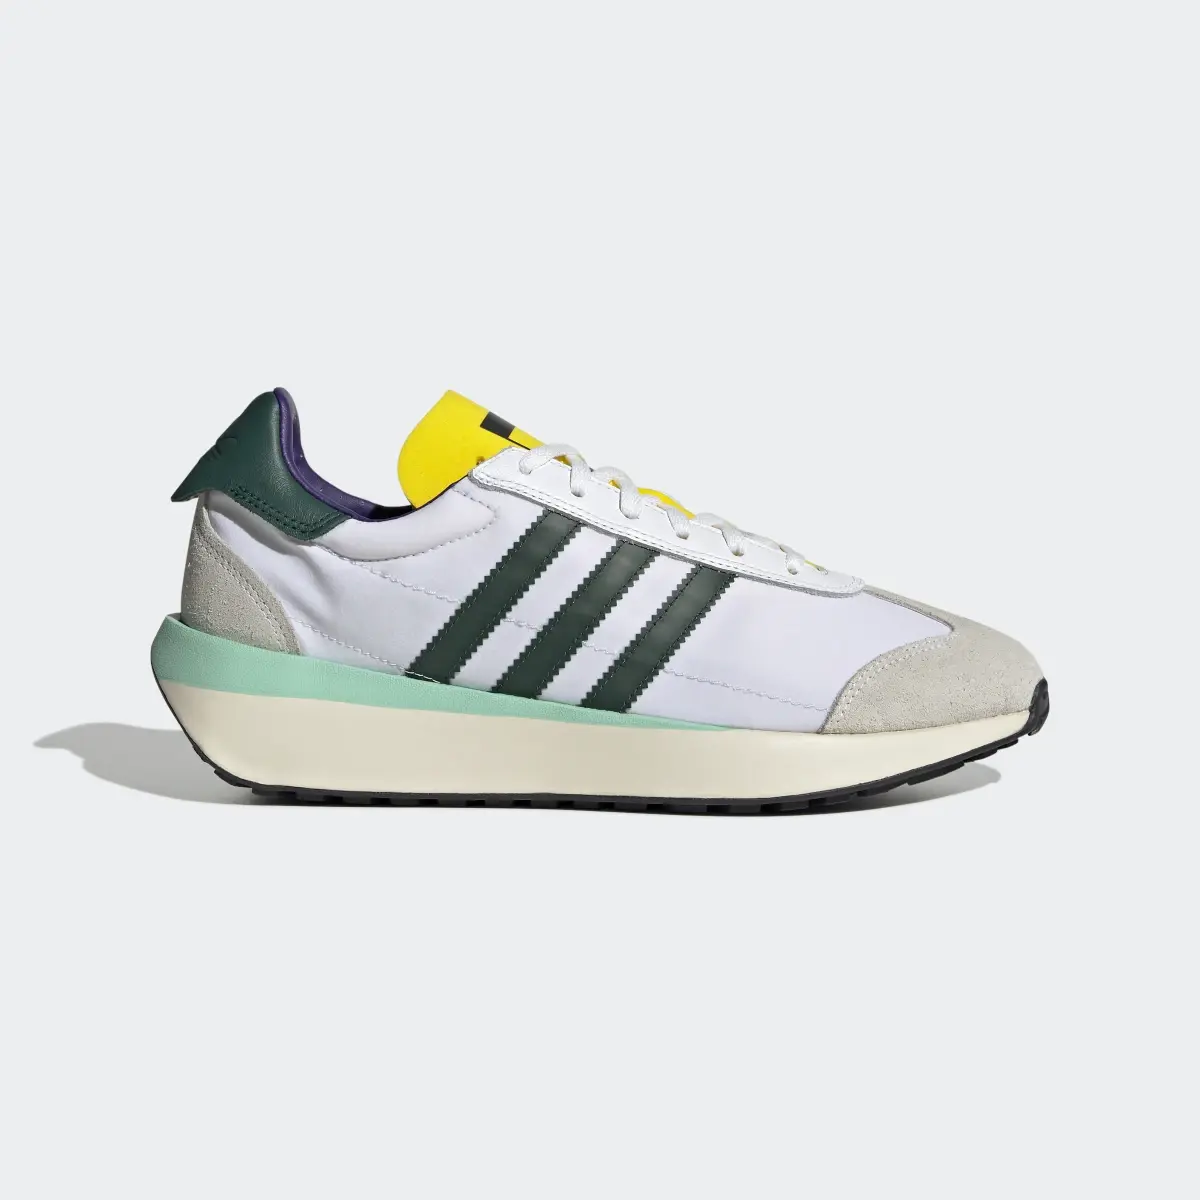 Adidas Sapatilhas Country XLG. 2